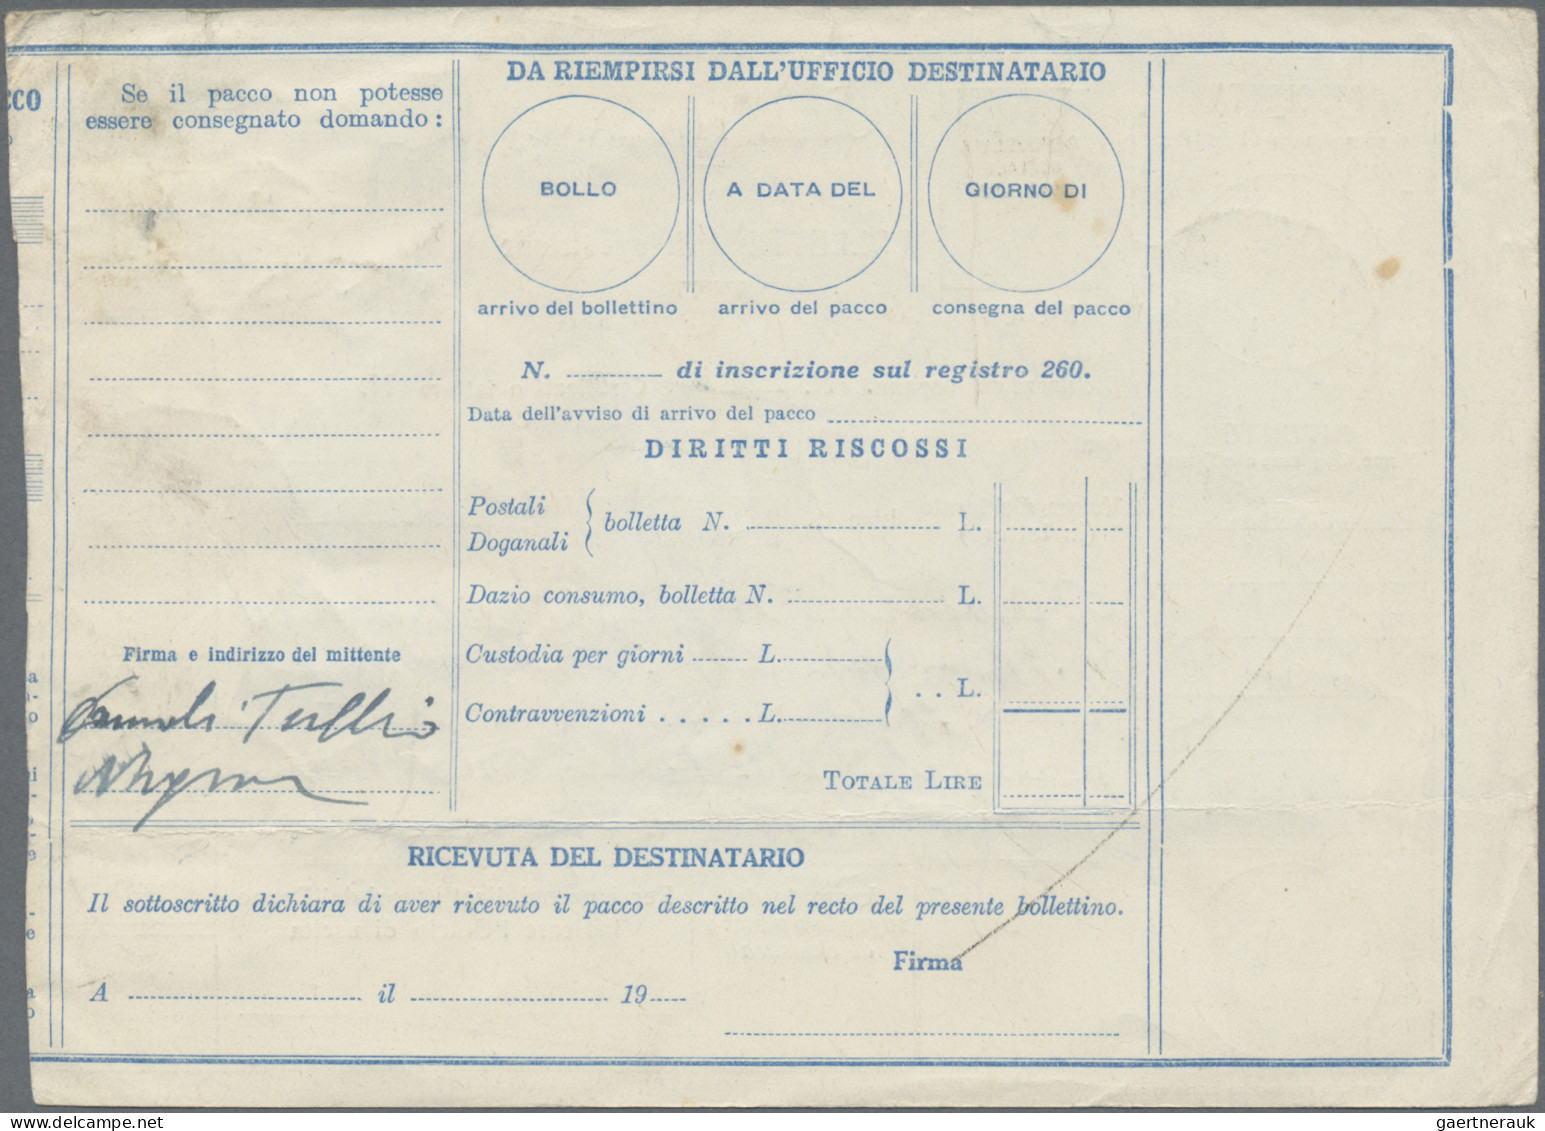 Italy - Postal Stationary: 1945, Parcel Despatch Form 40c. Blue Used From "PEDEM - Entiers Postaux